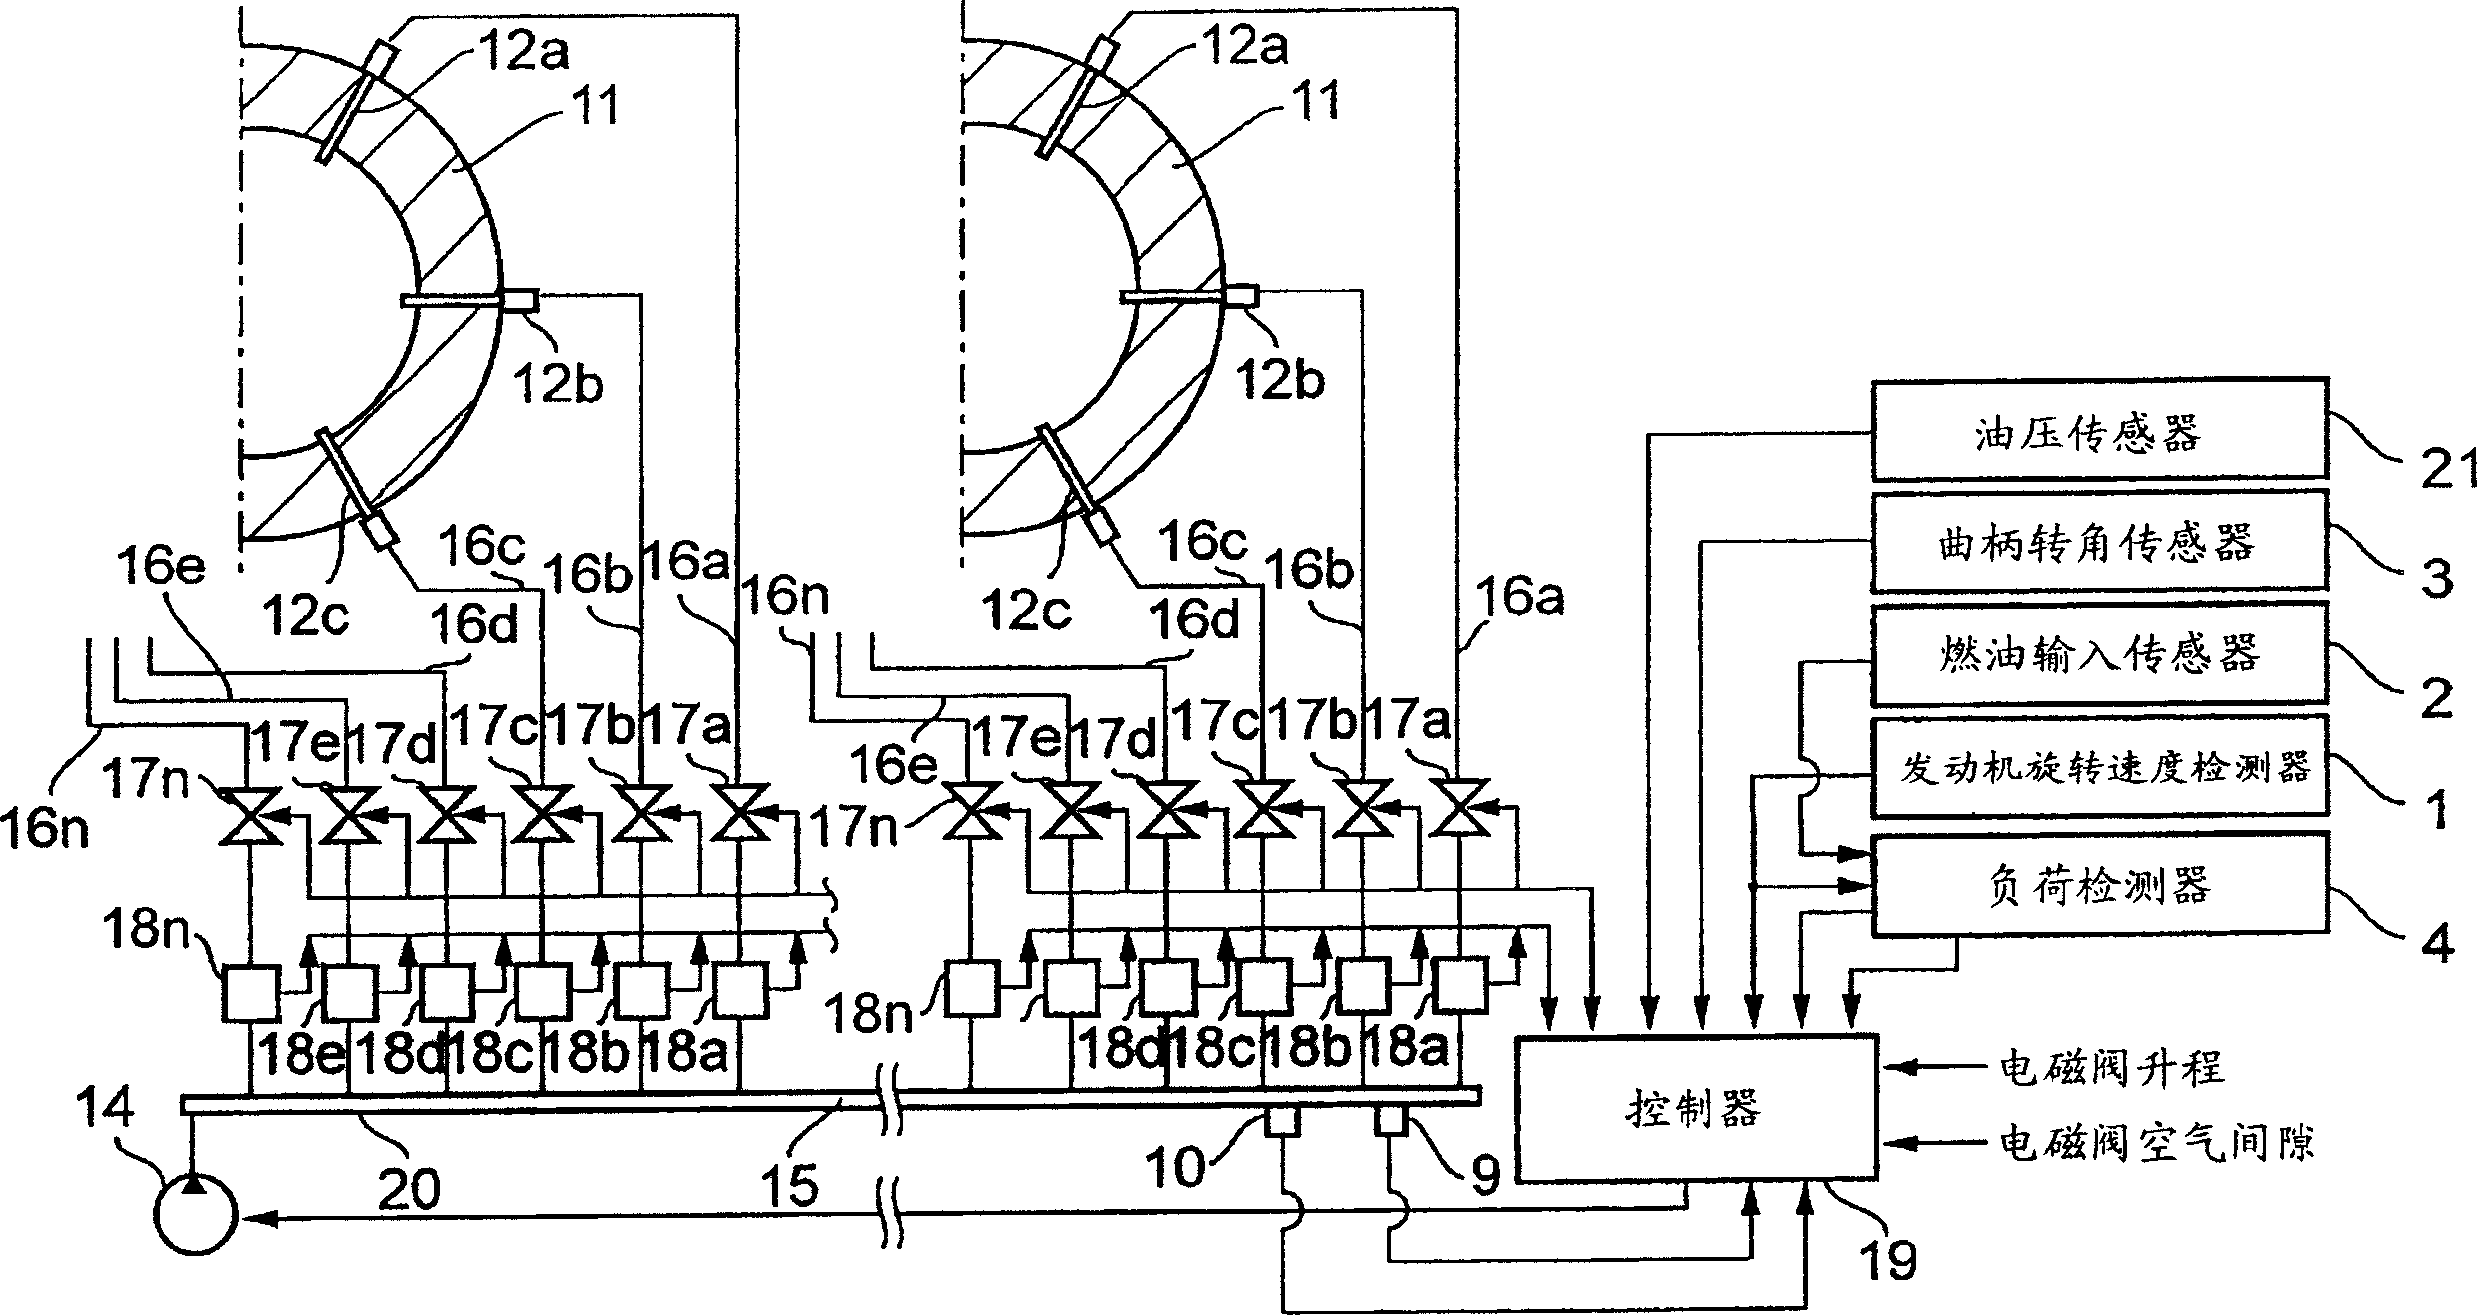 Internal combustion engine with cylinder lubricating system